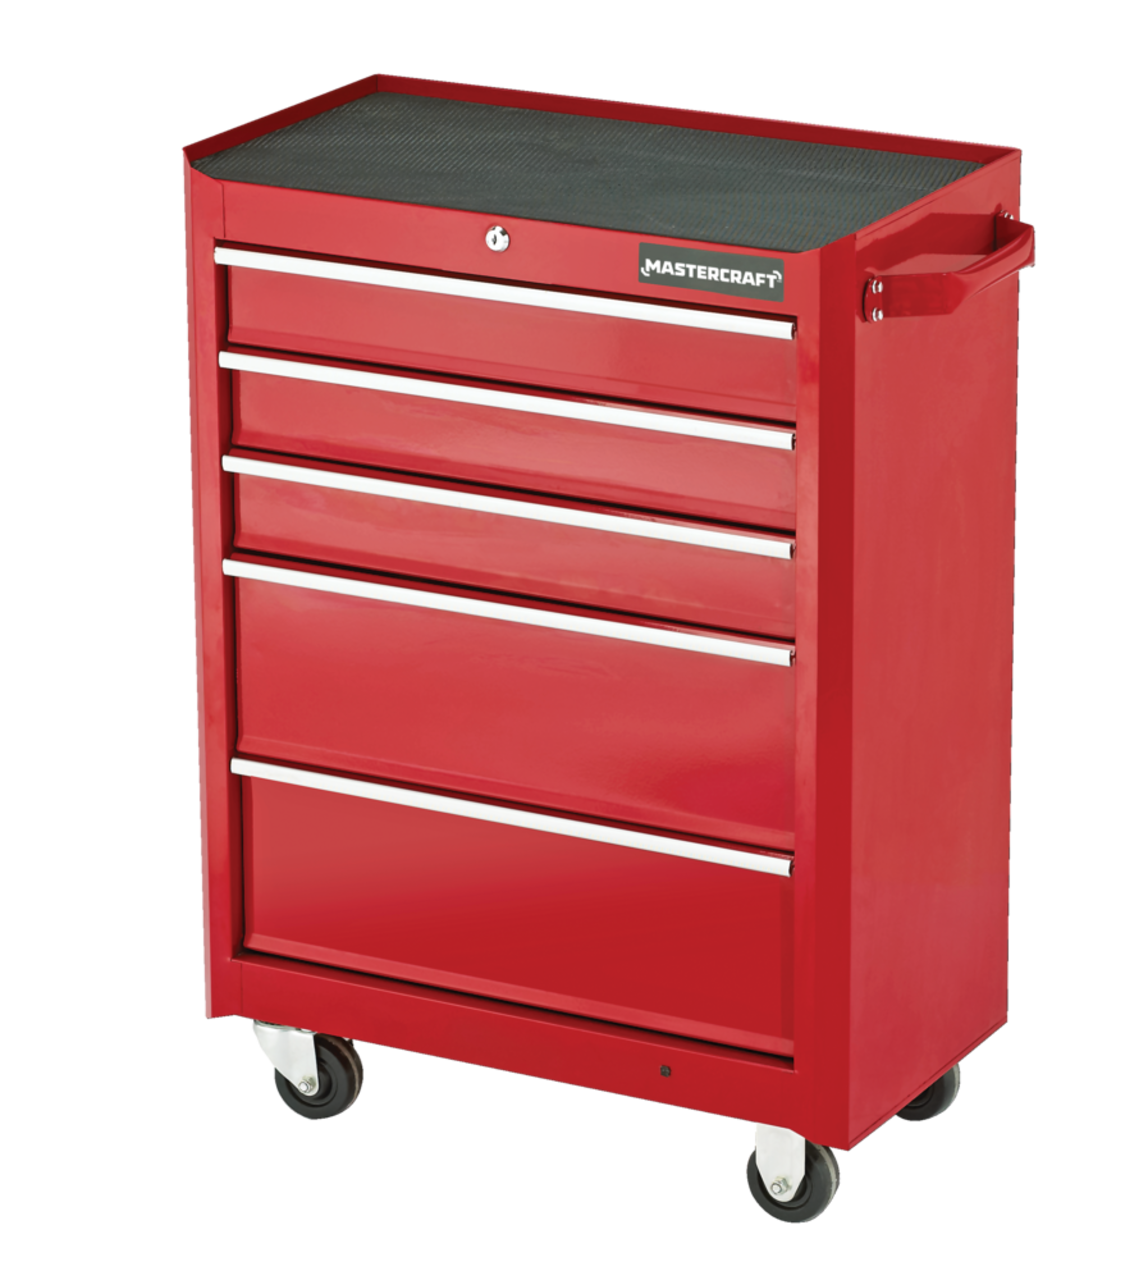 Tool Chests & Tool Cabinets, CRAFTSMAN, tool box